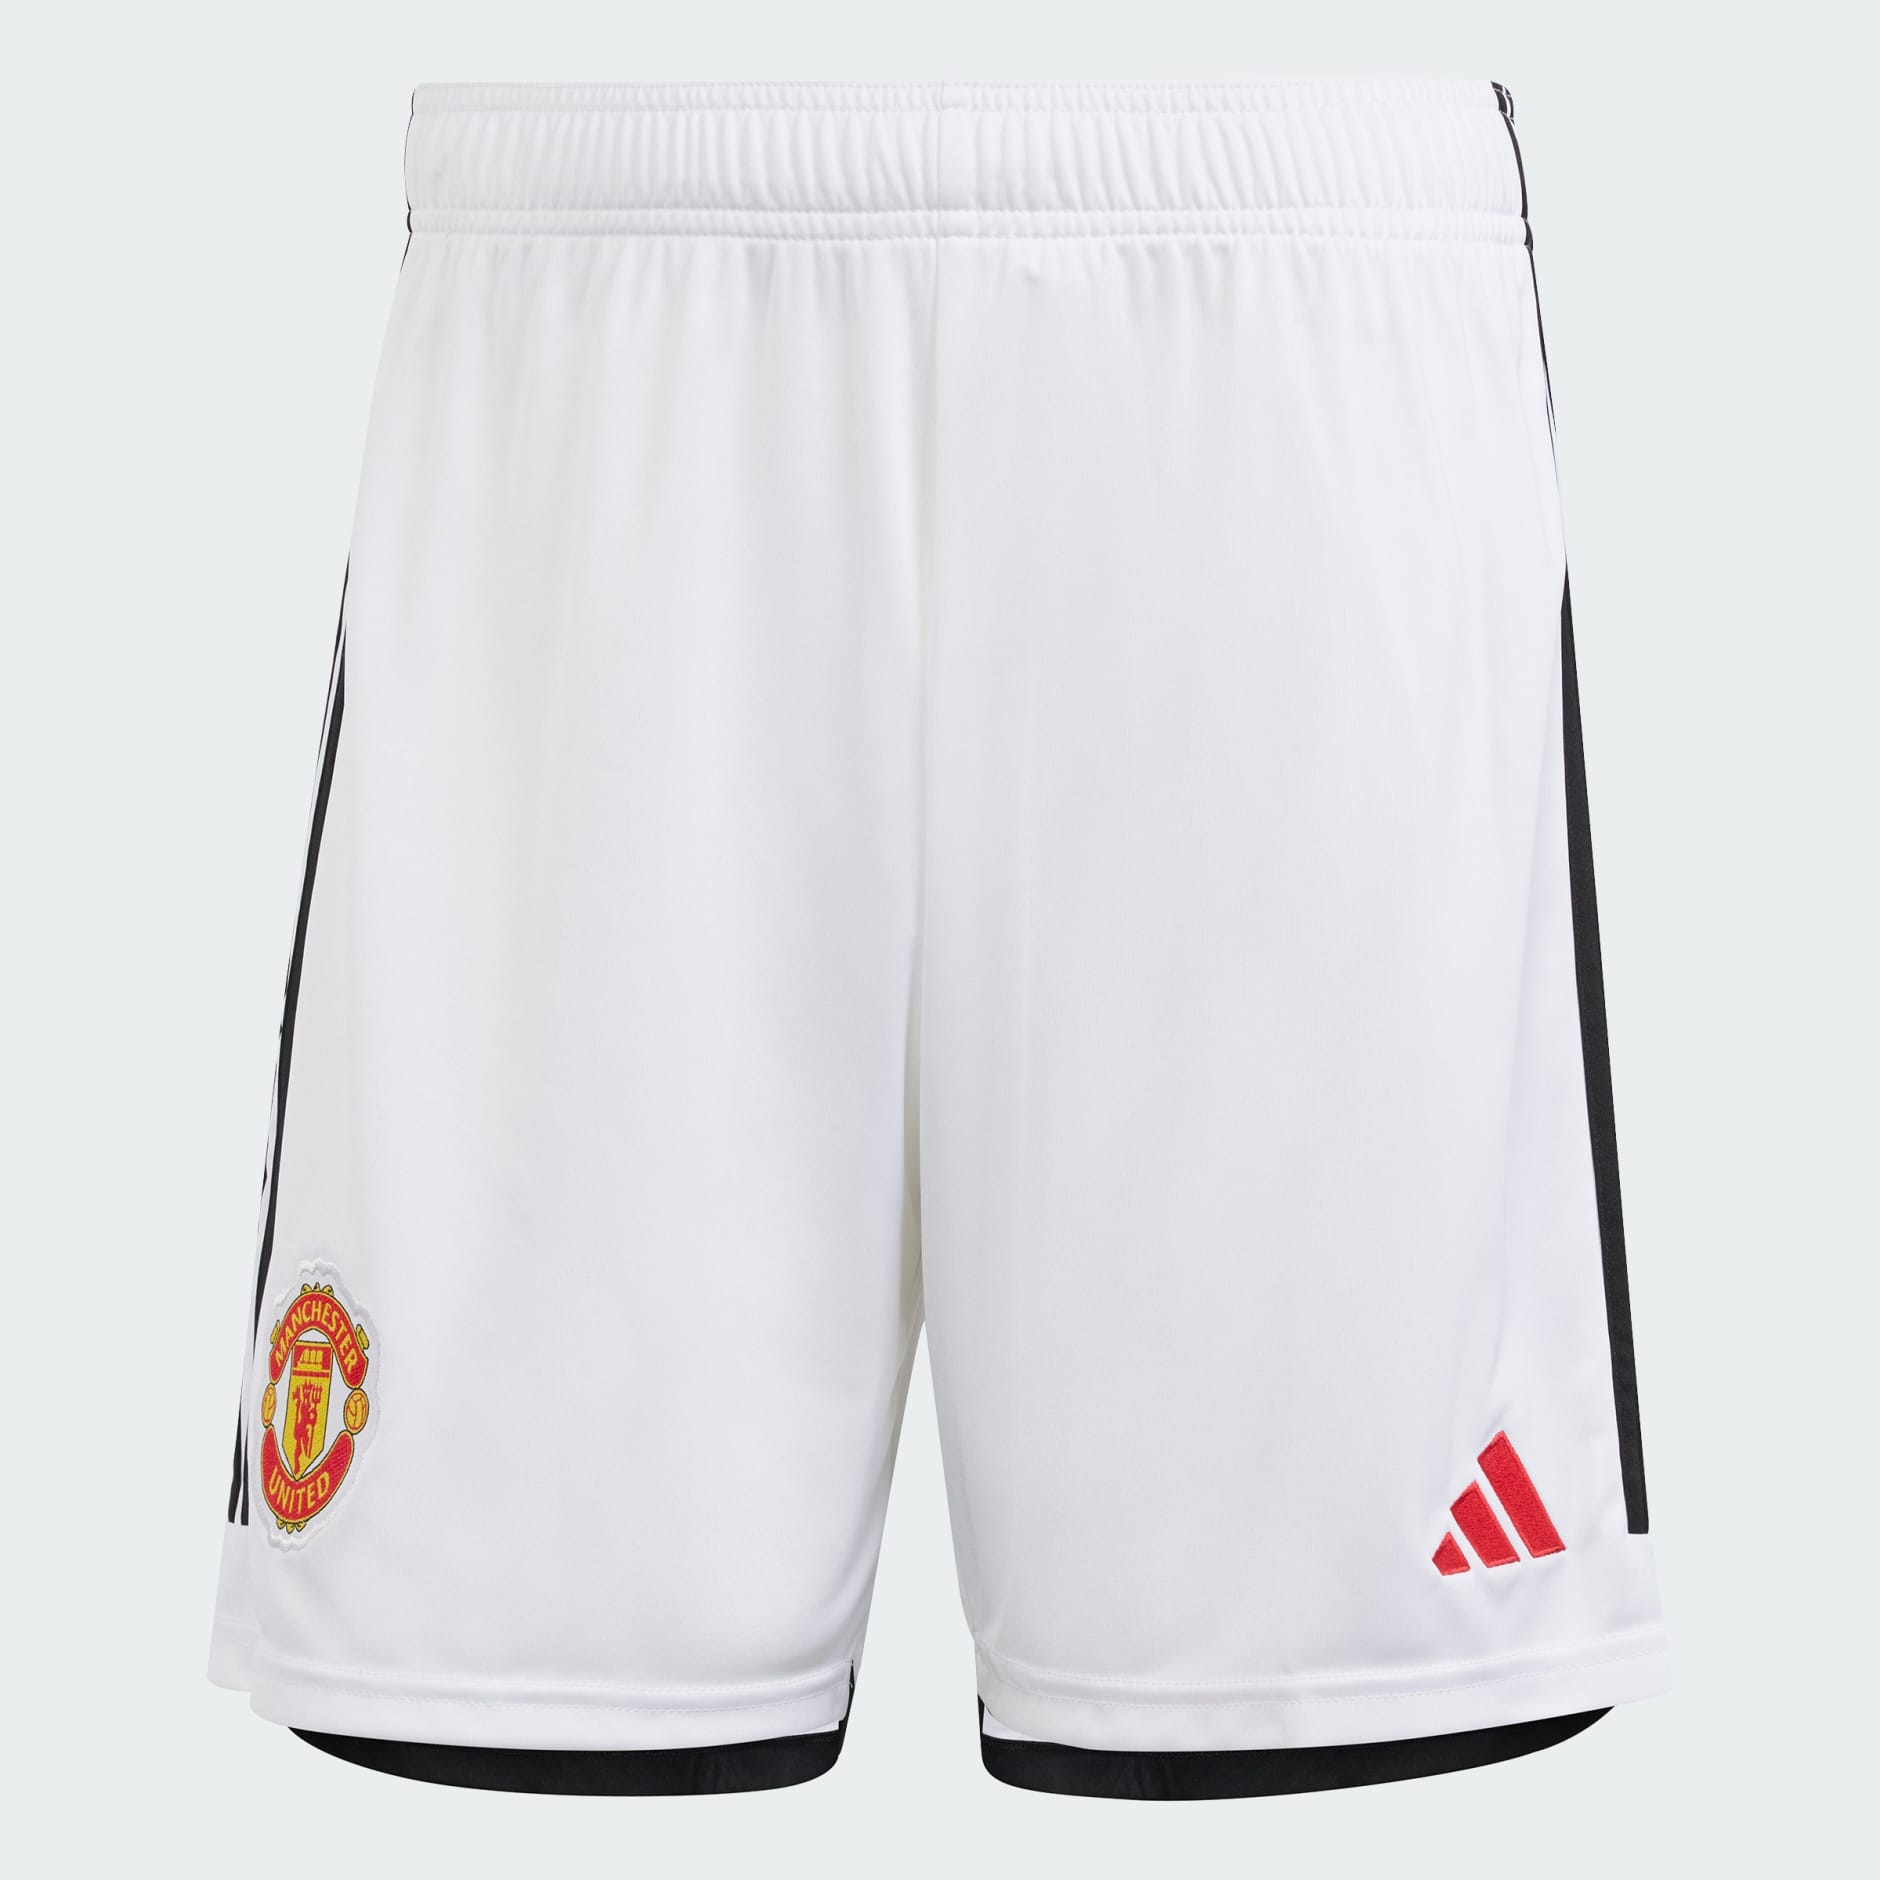 Clothing - Manchester United 23/24 Home Shorts - White | adidas South ...